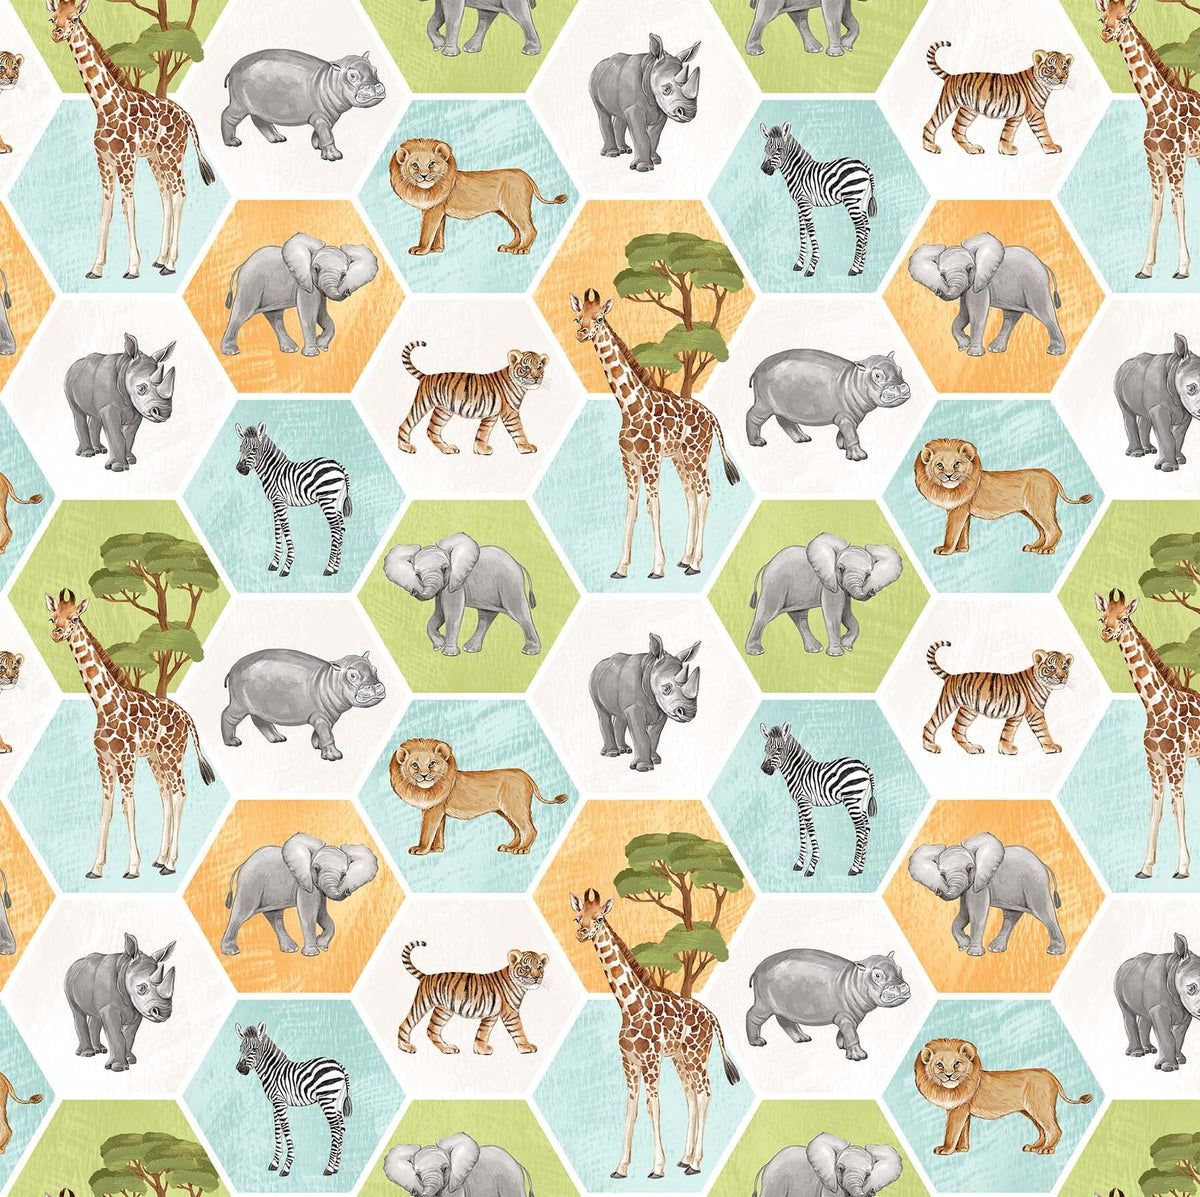 NEW! Welcome Baby - Quilt PATTERN - by Phoebe Moon Designs - Features Baby  Safari Fabrics by Deborah Edwards for Northcott